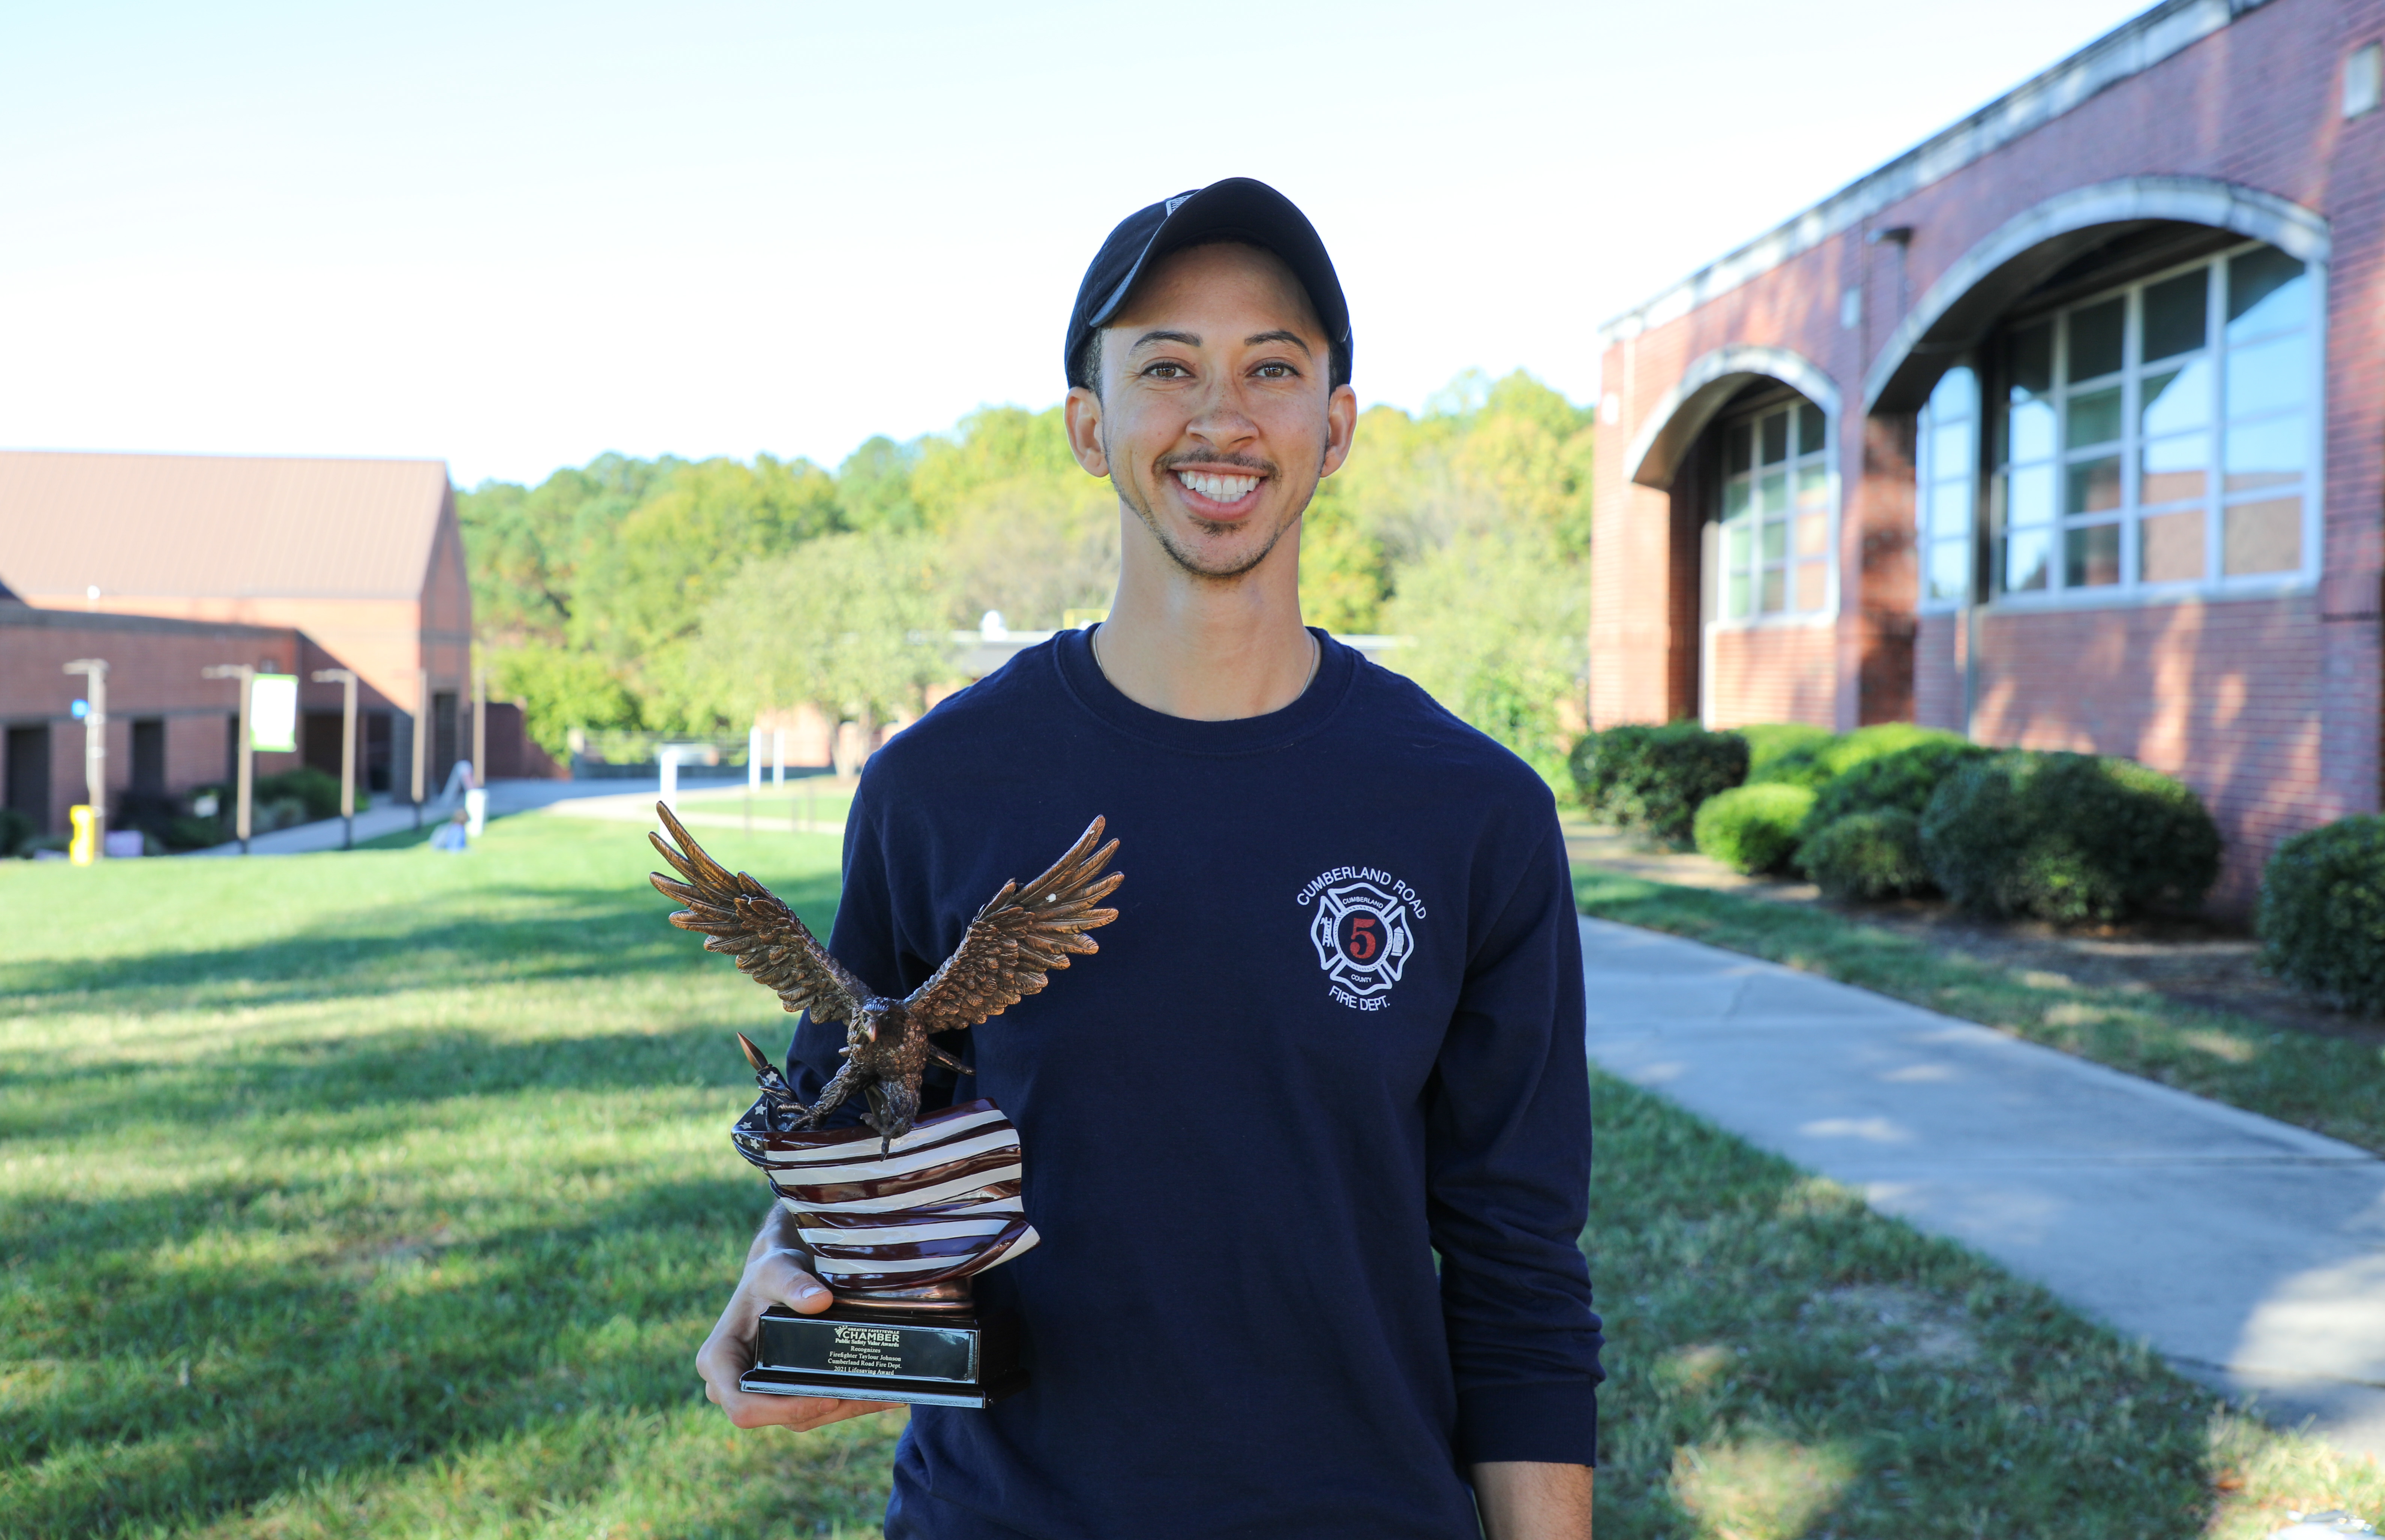 person holding eagle trophy and smiling on campus